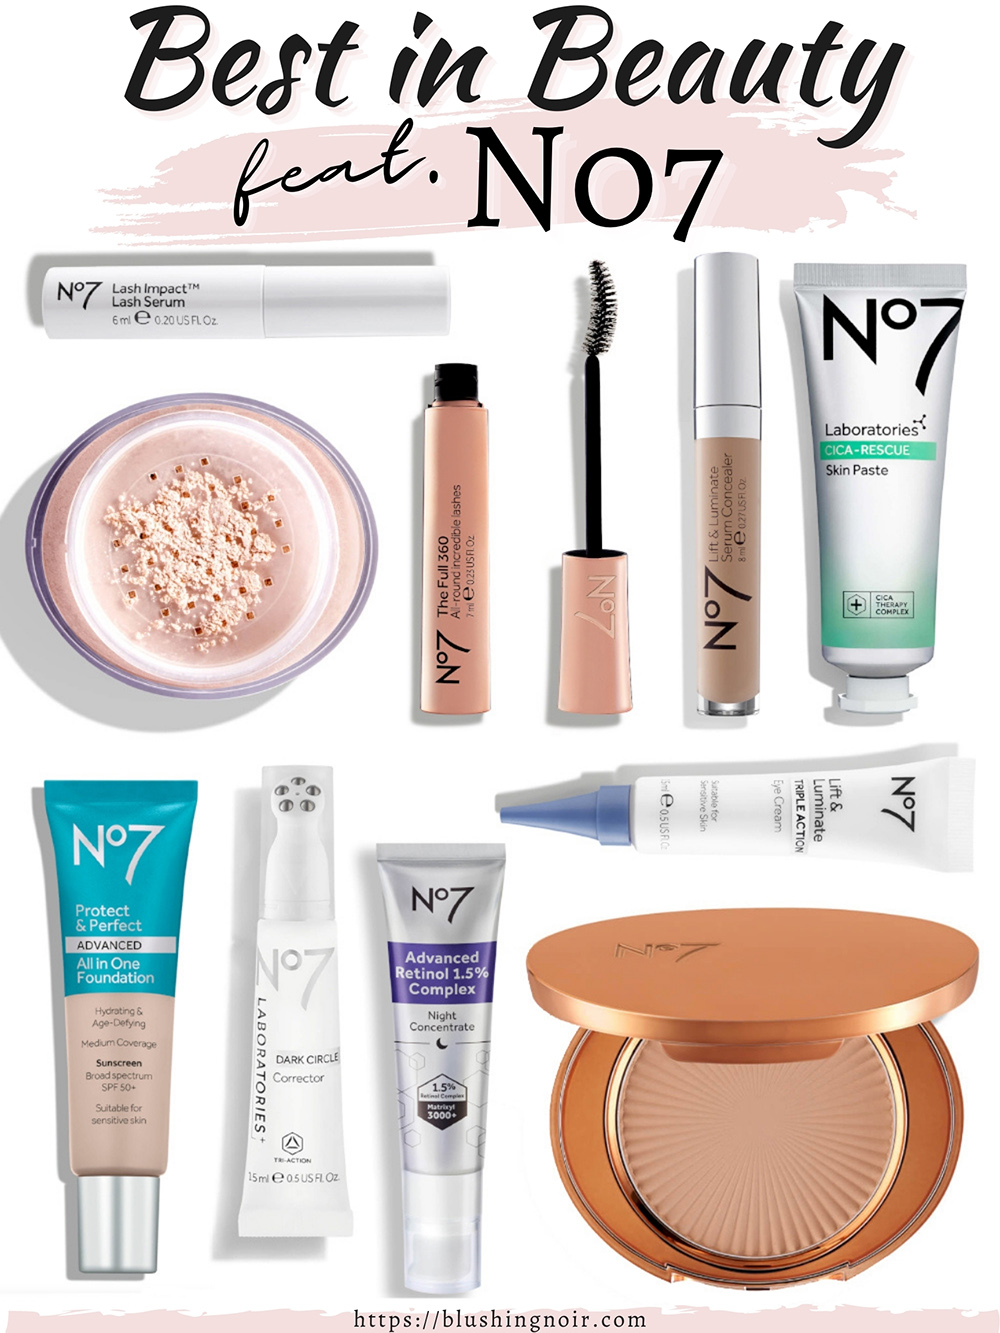 No7 Beauty, Skincare, & Makeup Products